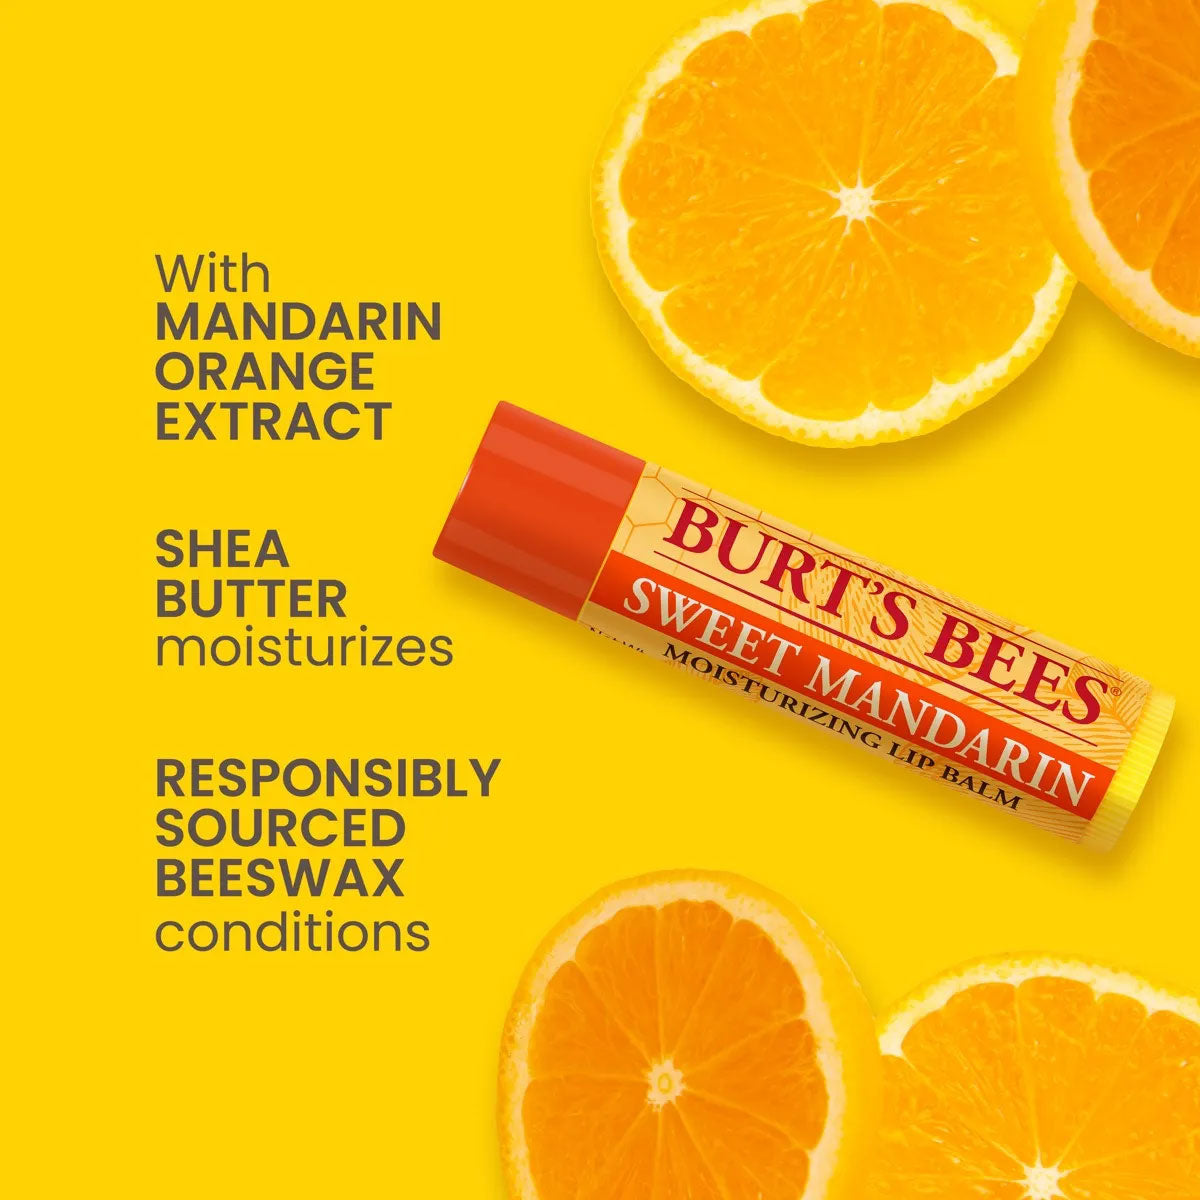 Pack 4x Bálsamo labial Blister Freshly Picked Burt’s Bees 4 gr - 🐝🍃 producto 100% natural